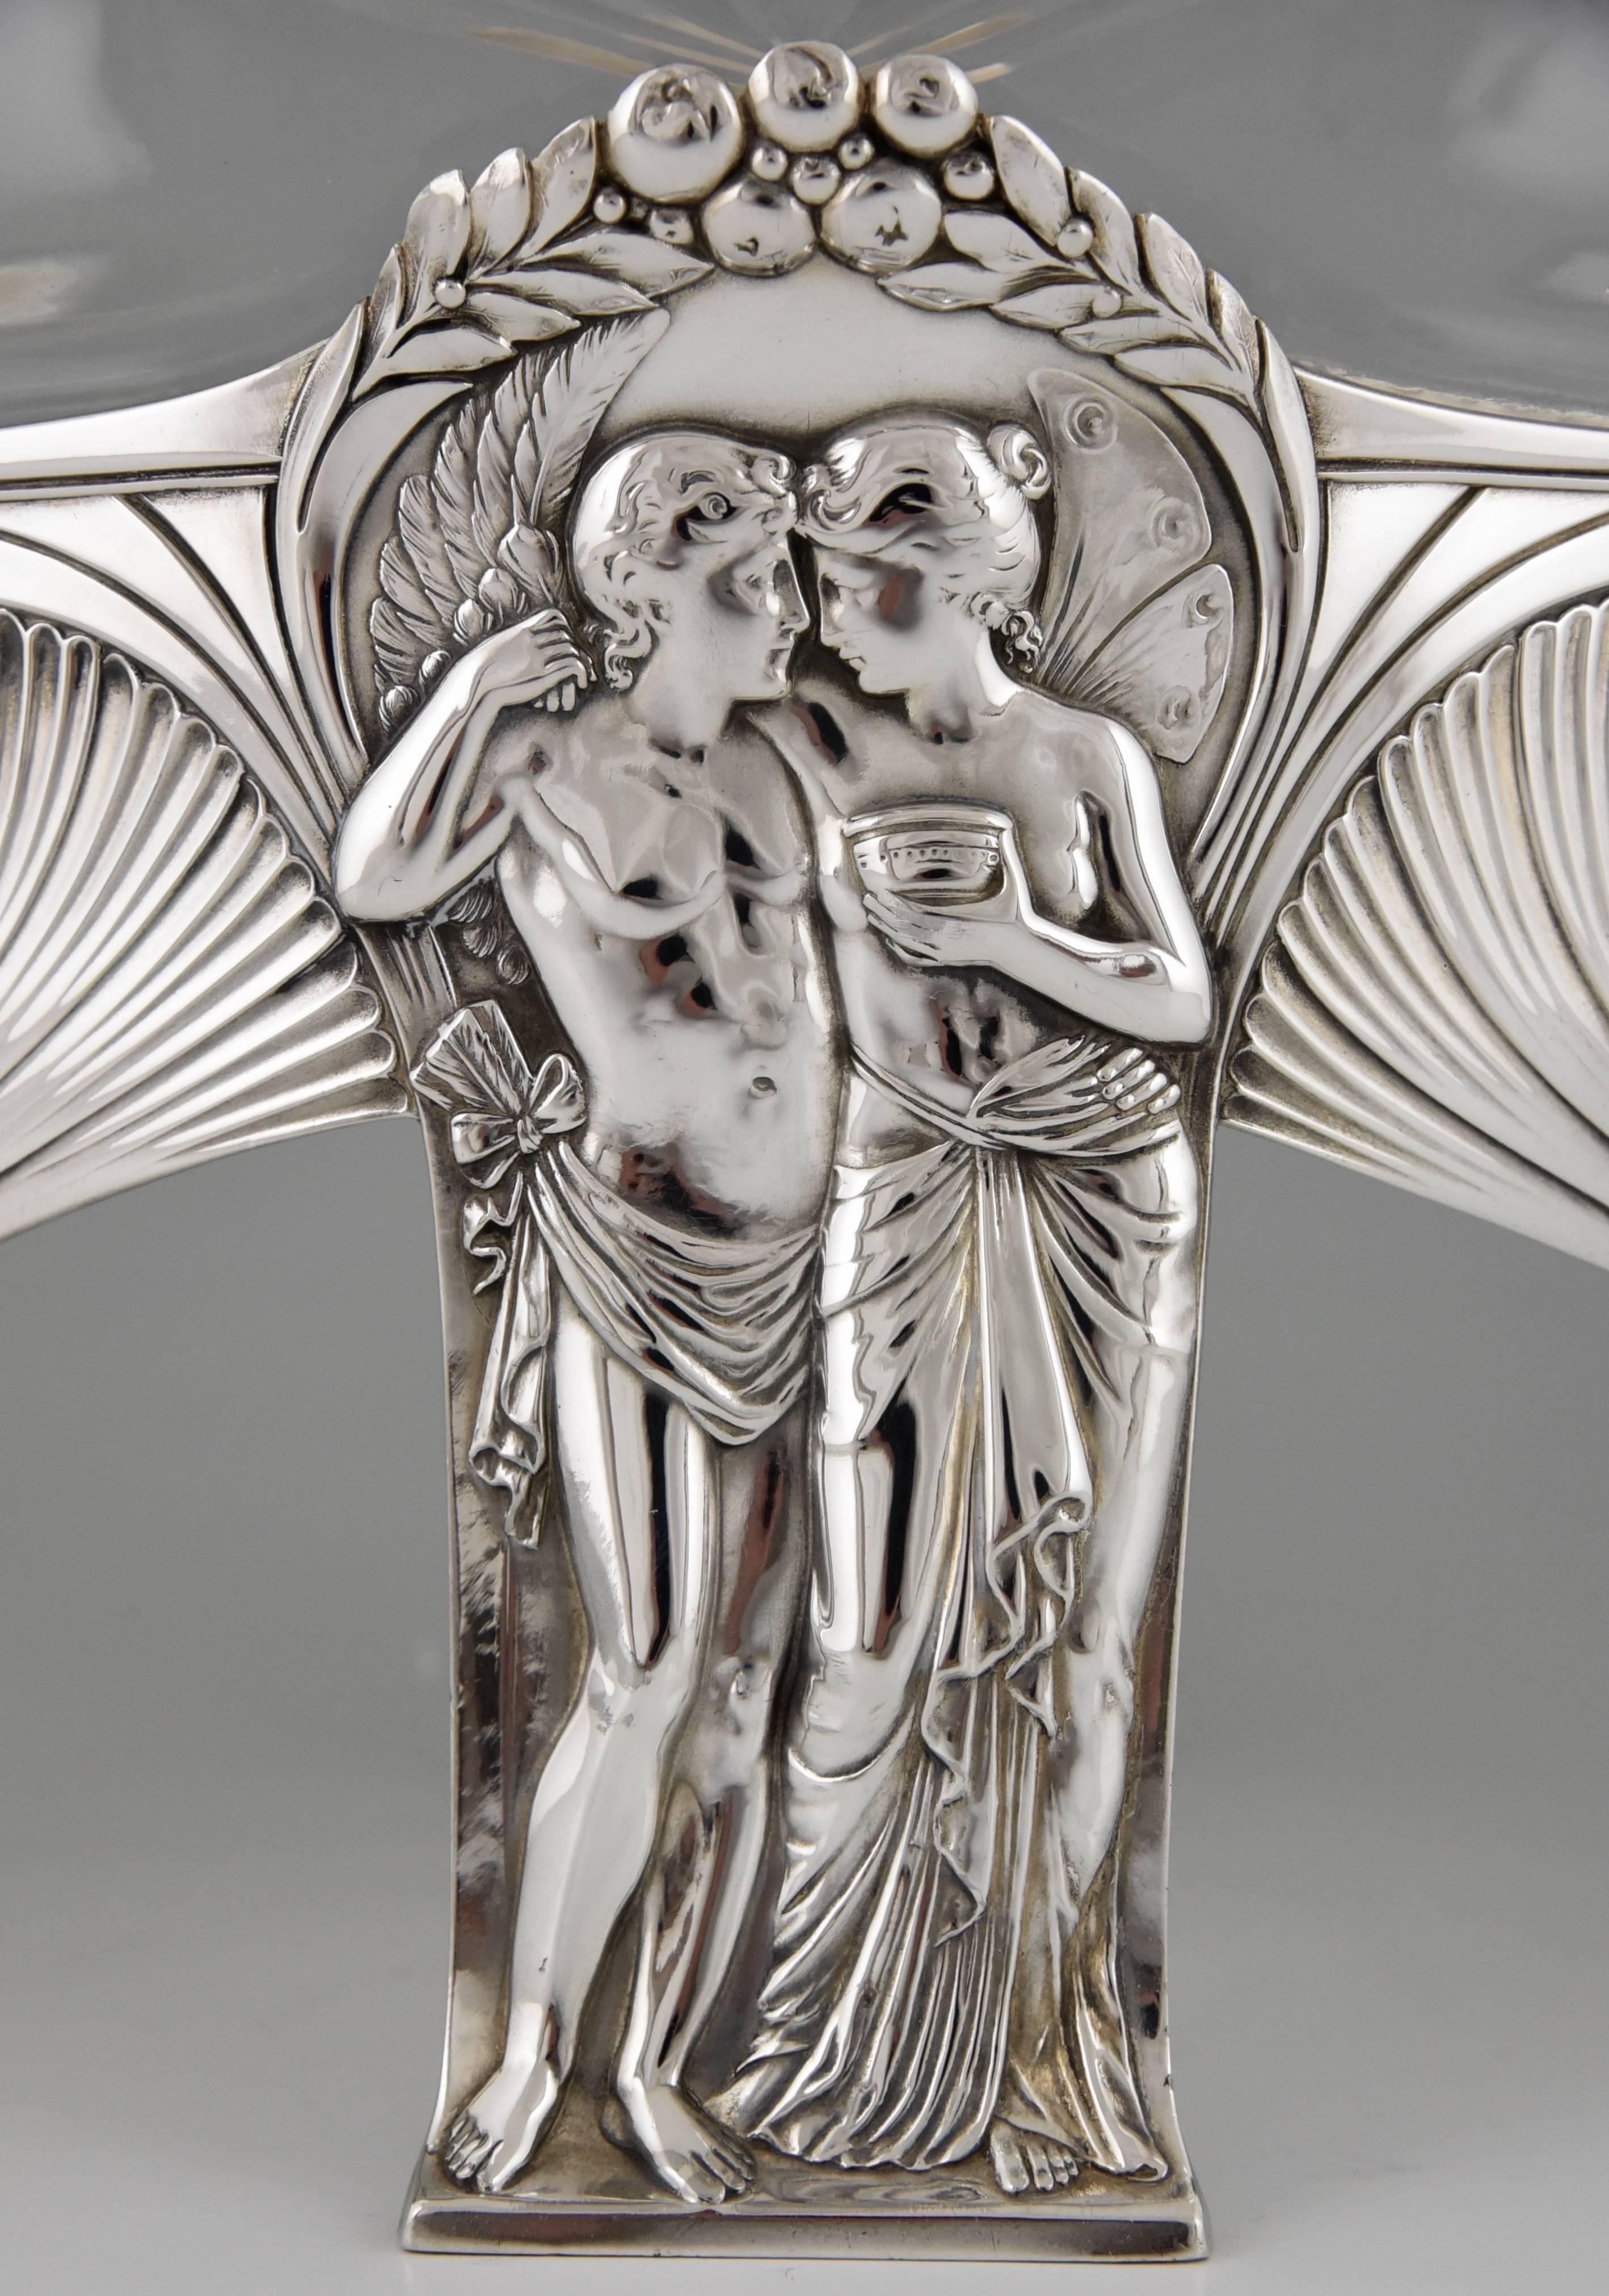 20th Century Art Nouveau Silvered Flower Dish with Couple by WMF, 1906